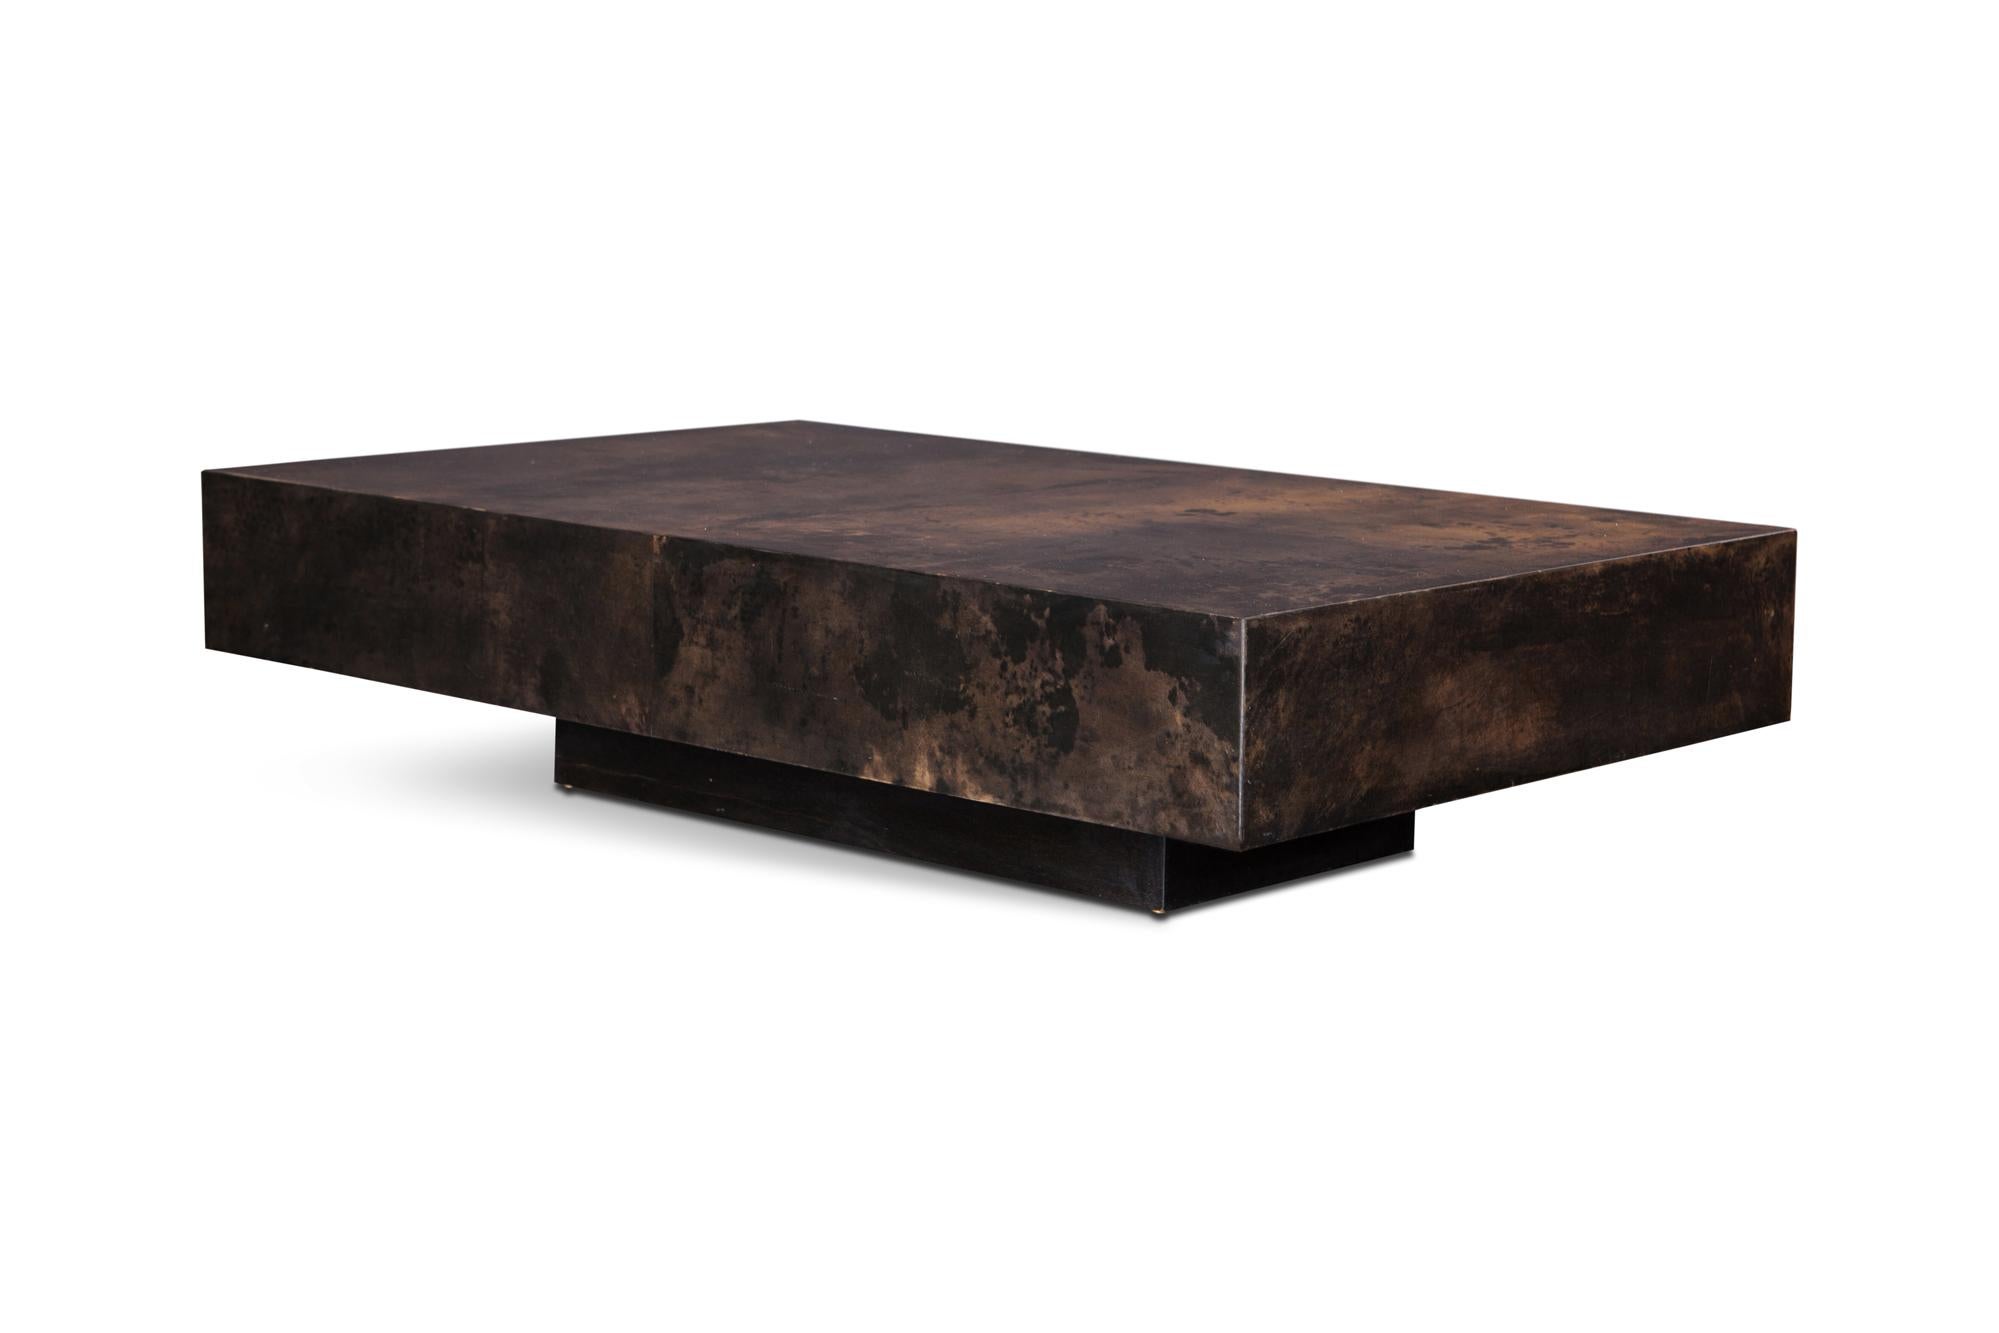 Coffee table by Italian designer Aldo Tura. 

The table is made of brown lacquer, giving it a surface covered in beautiful colours, and patterns. The table has a floating appearance due to the hidden base. This particular example is a bit larger